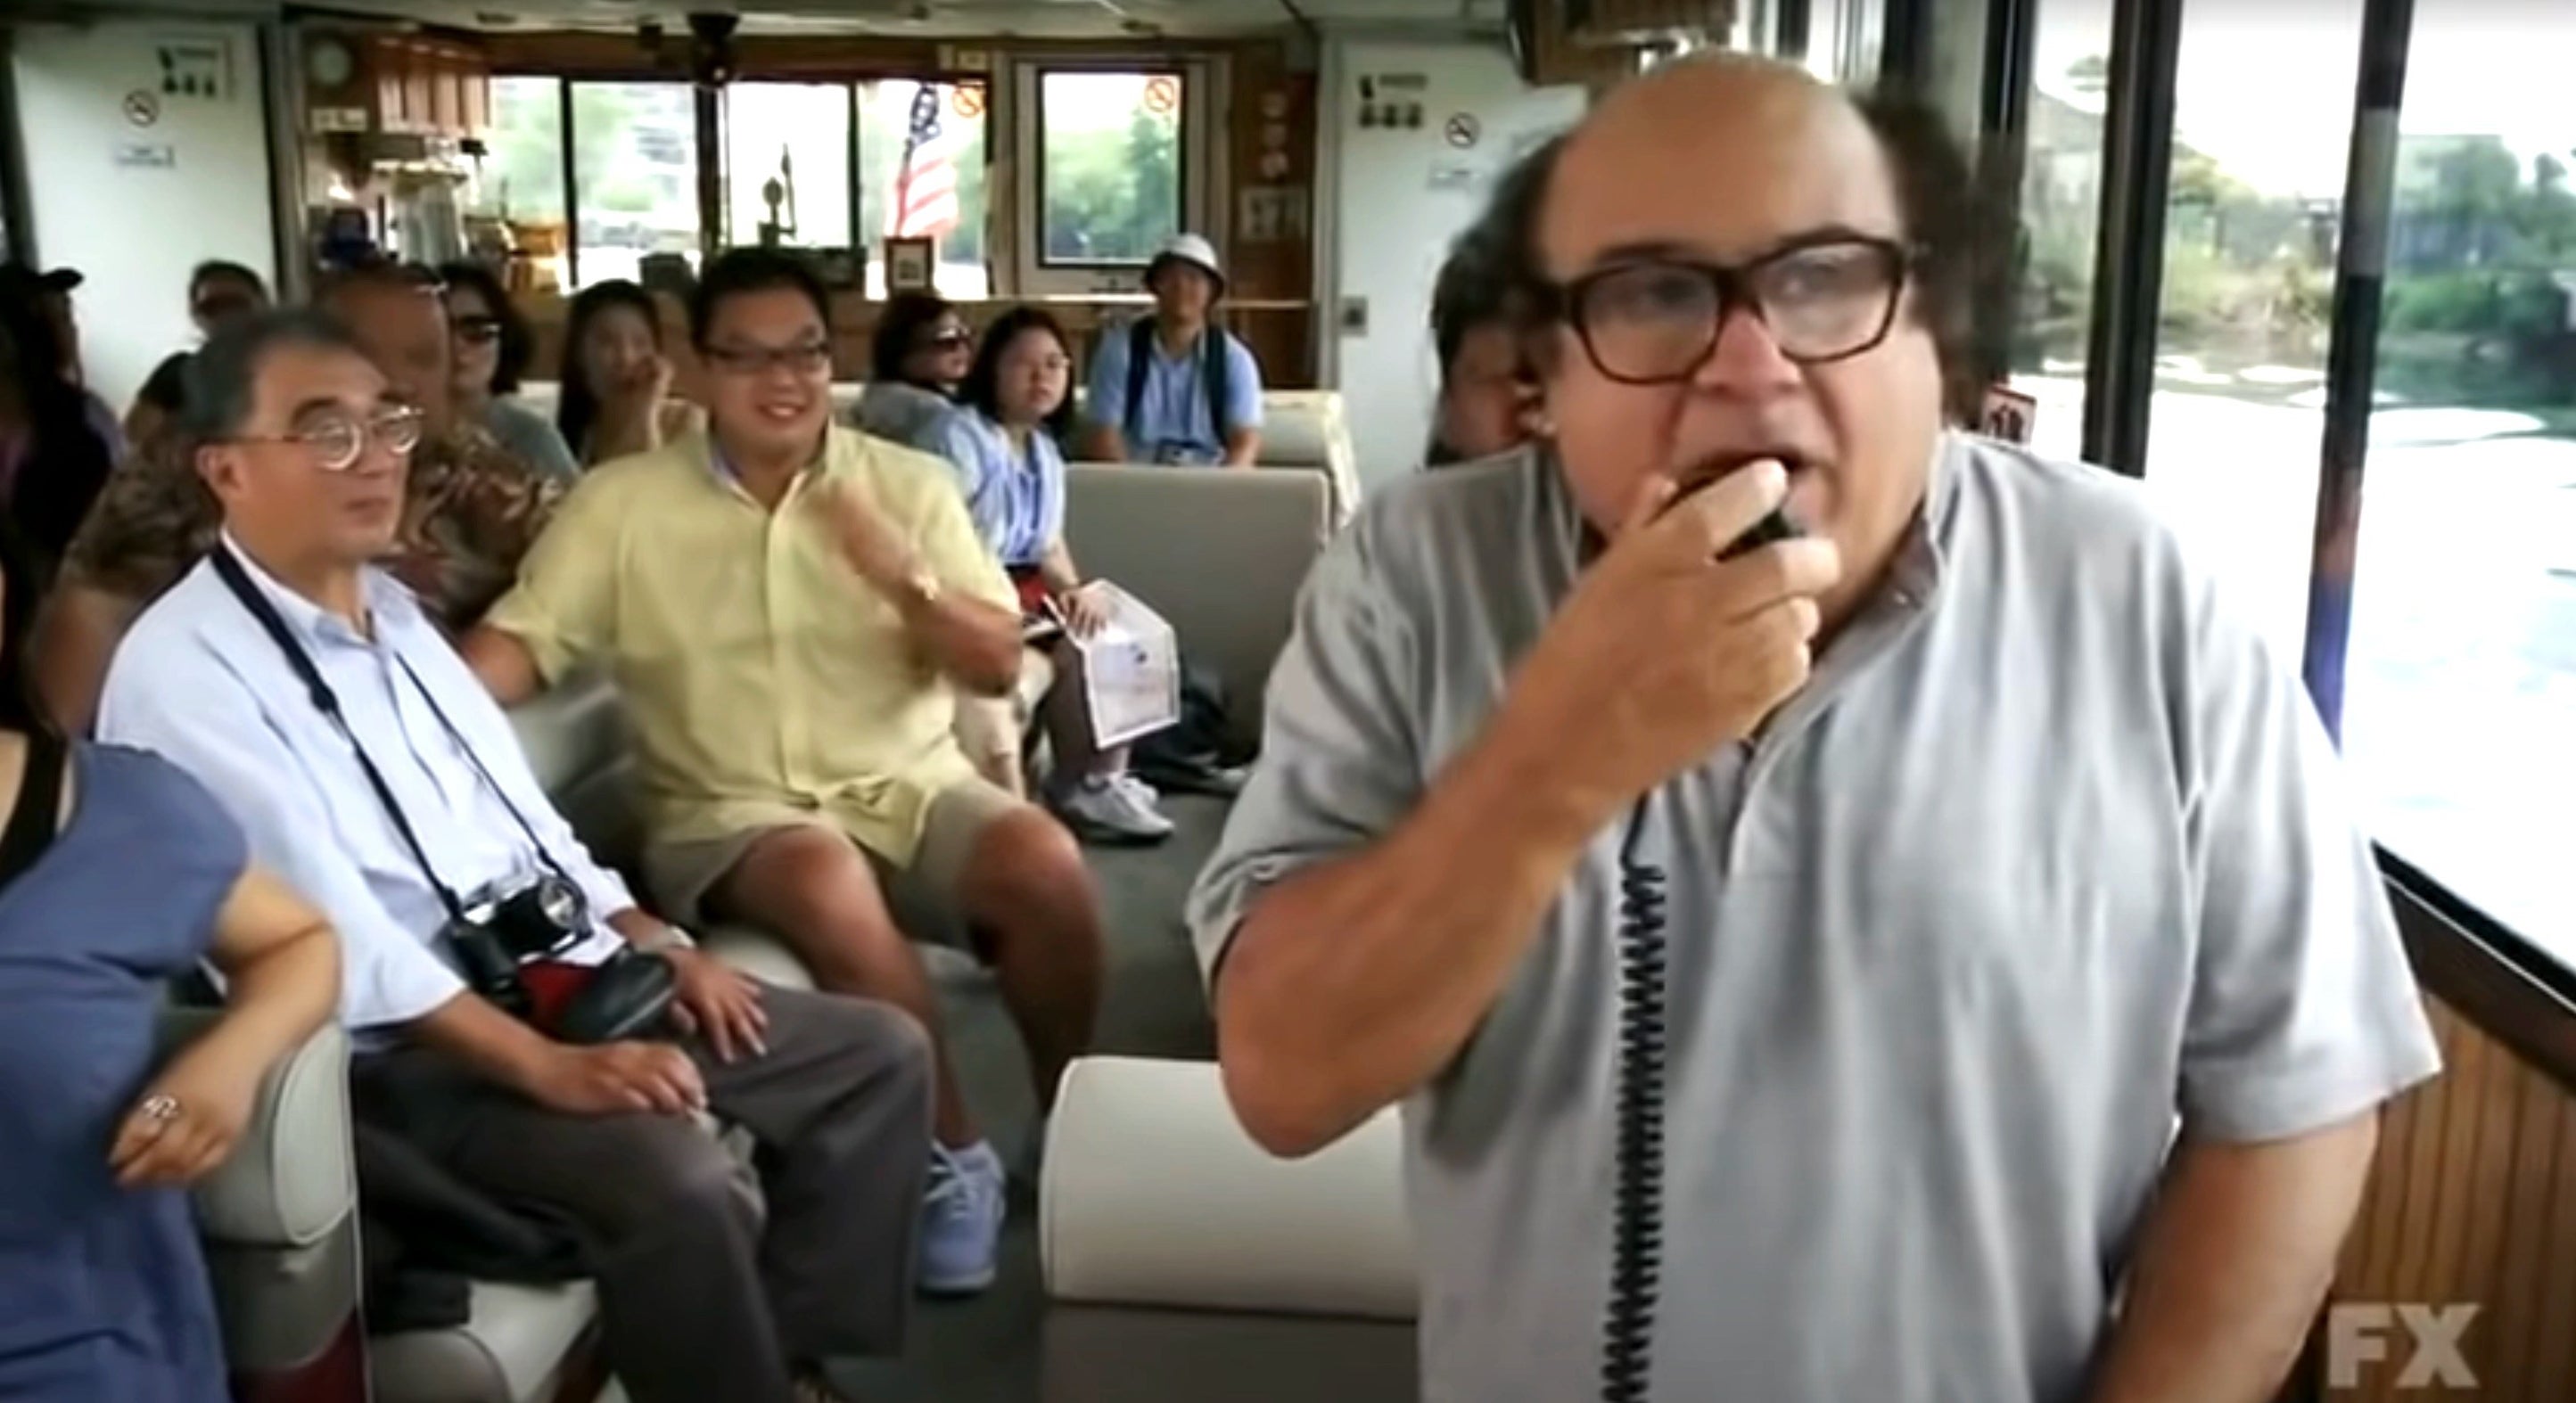 Danny DeVito giving people a tour and speaking on an intercom